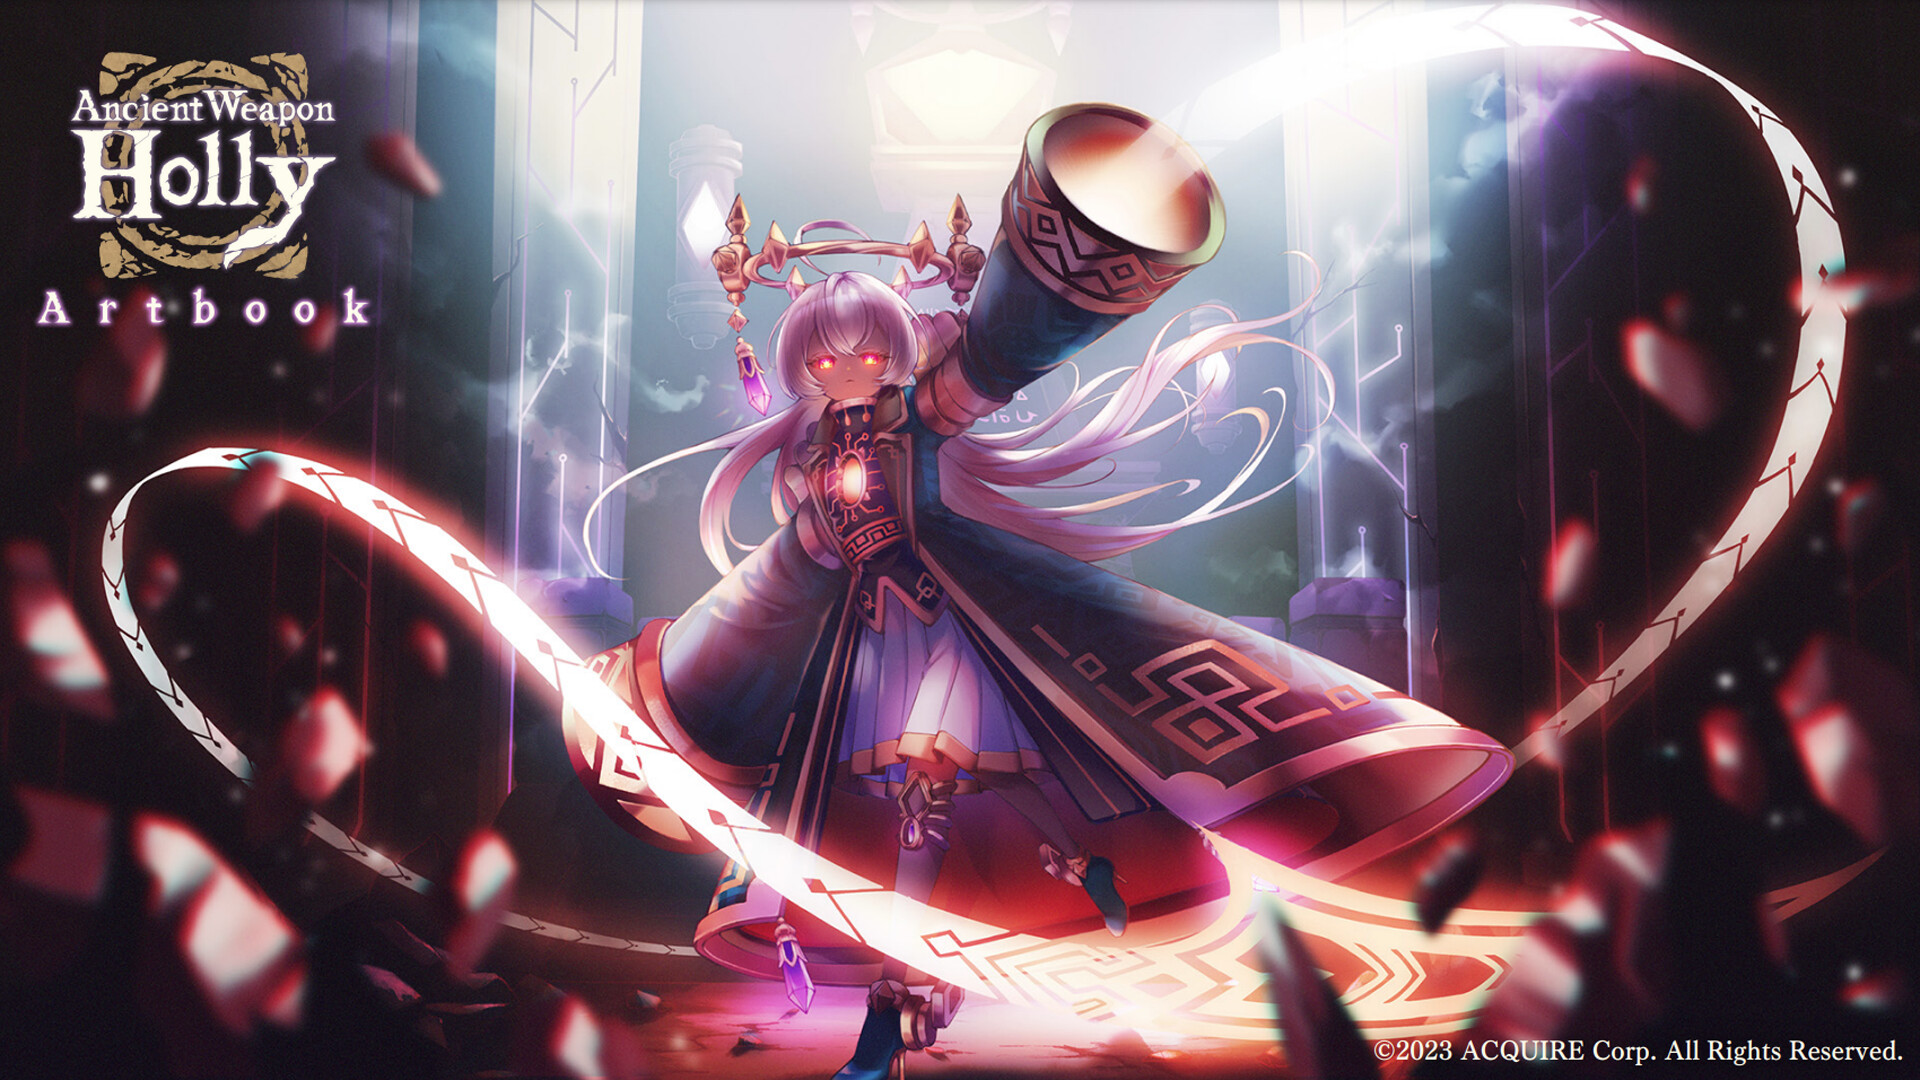 Ancient Weapon Holly - Artbook Featured Screenshot #1